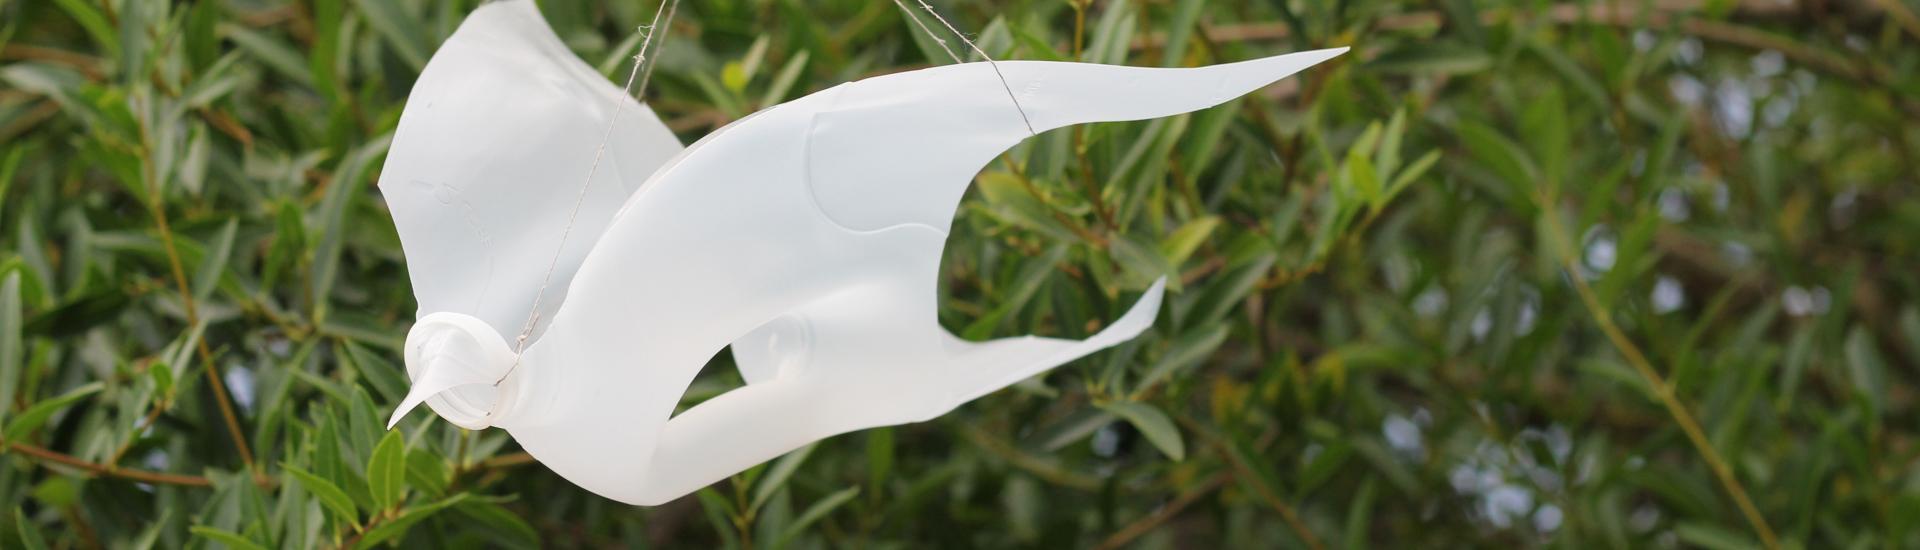 A bird figure made out of a recycled milk bottle hanging mid air with greenery in the background